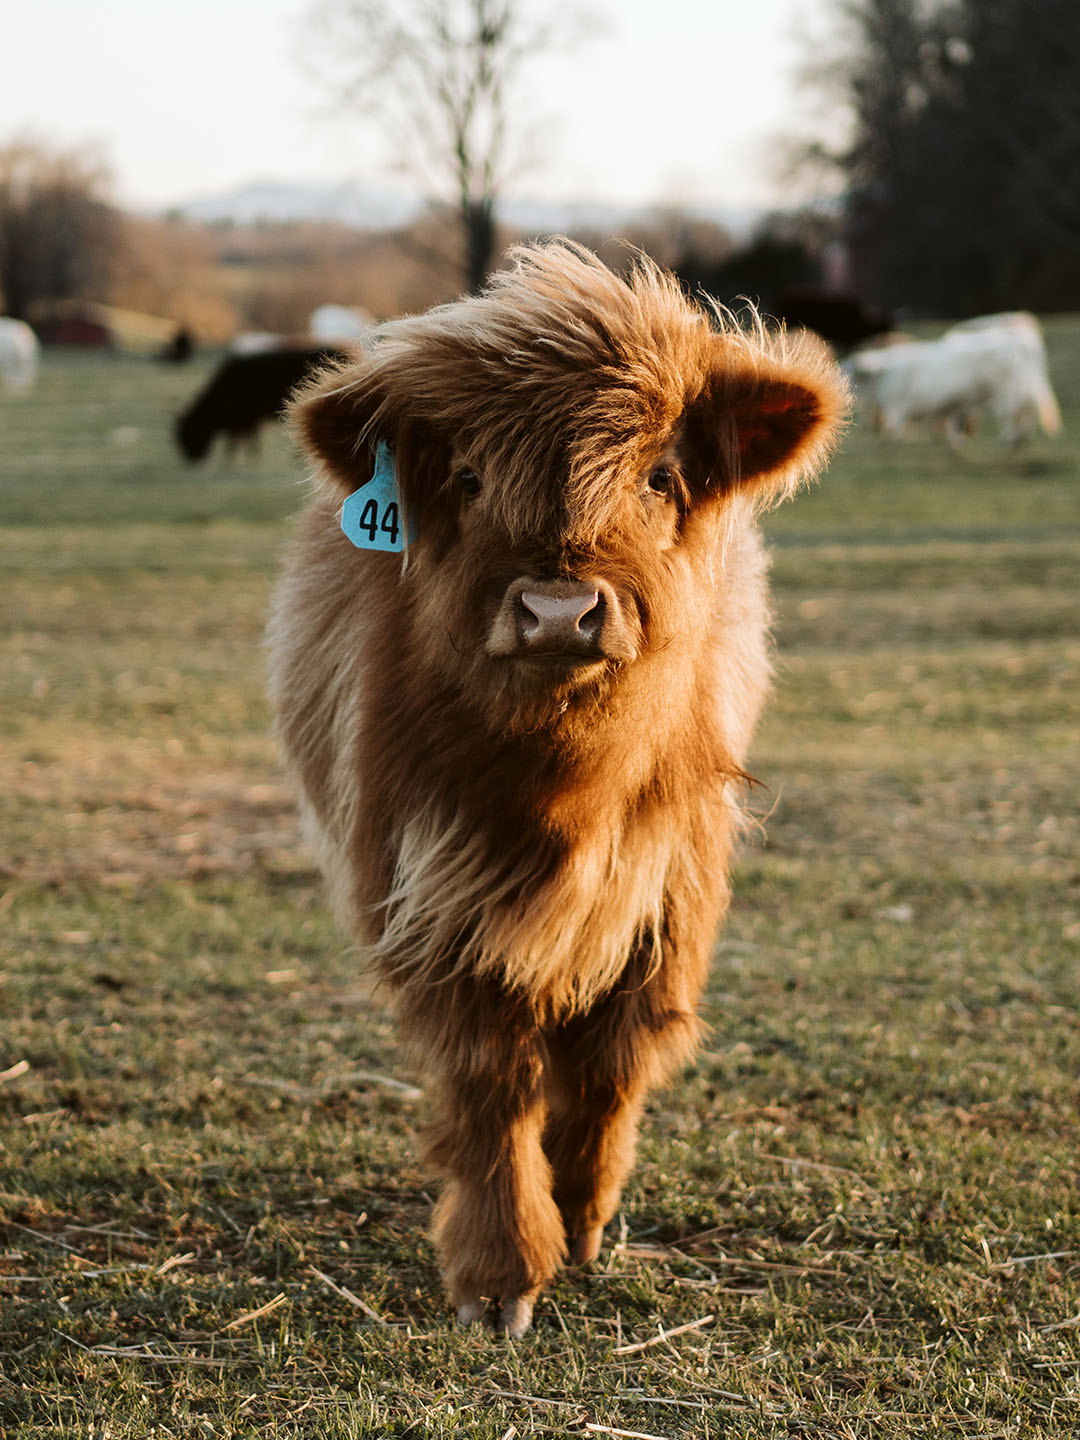 Mini Cattle Registration - Add Your Cow to the Registry